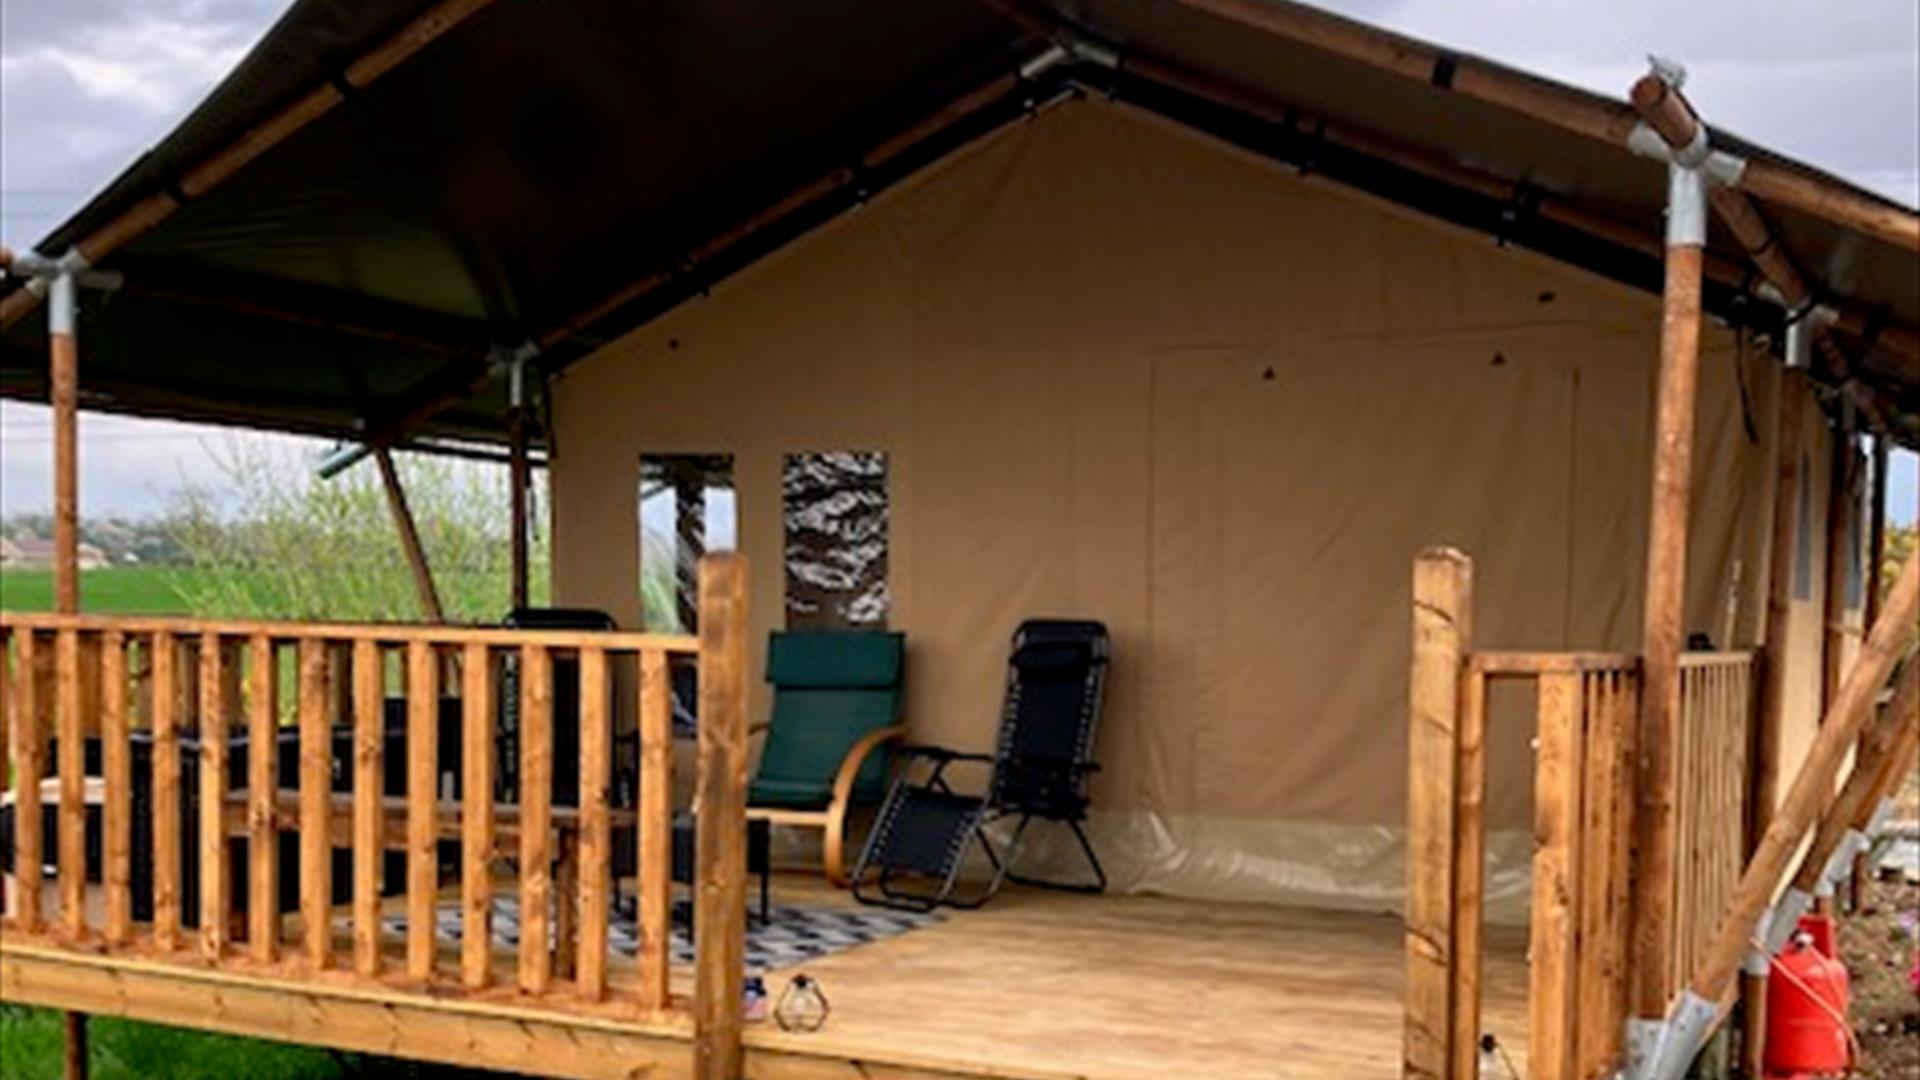 The outside of the tent with a covered deck and chairs